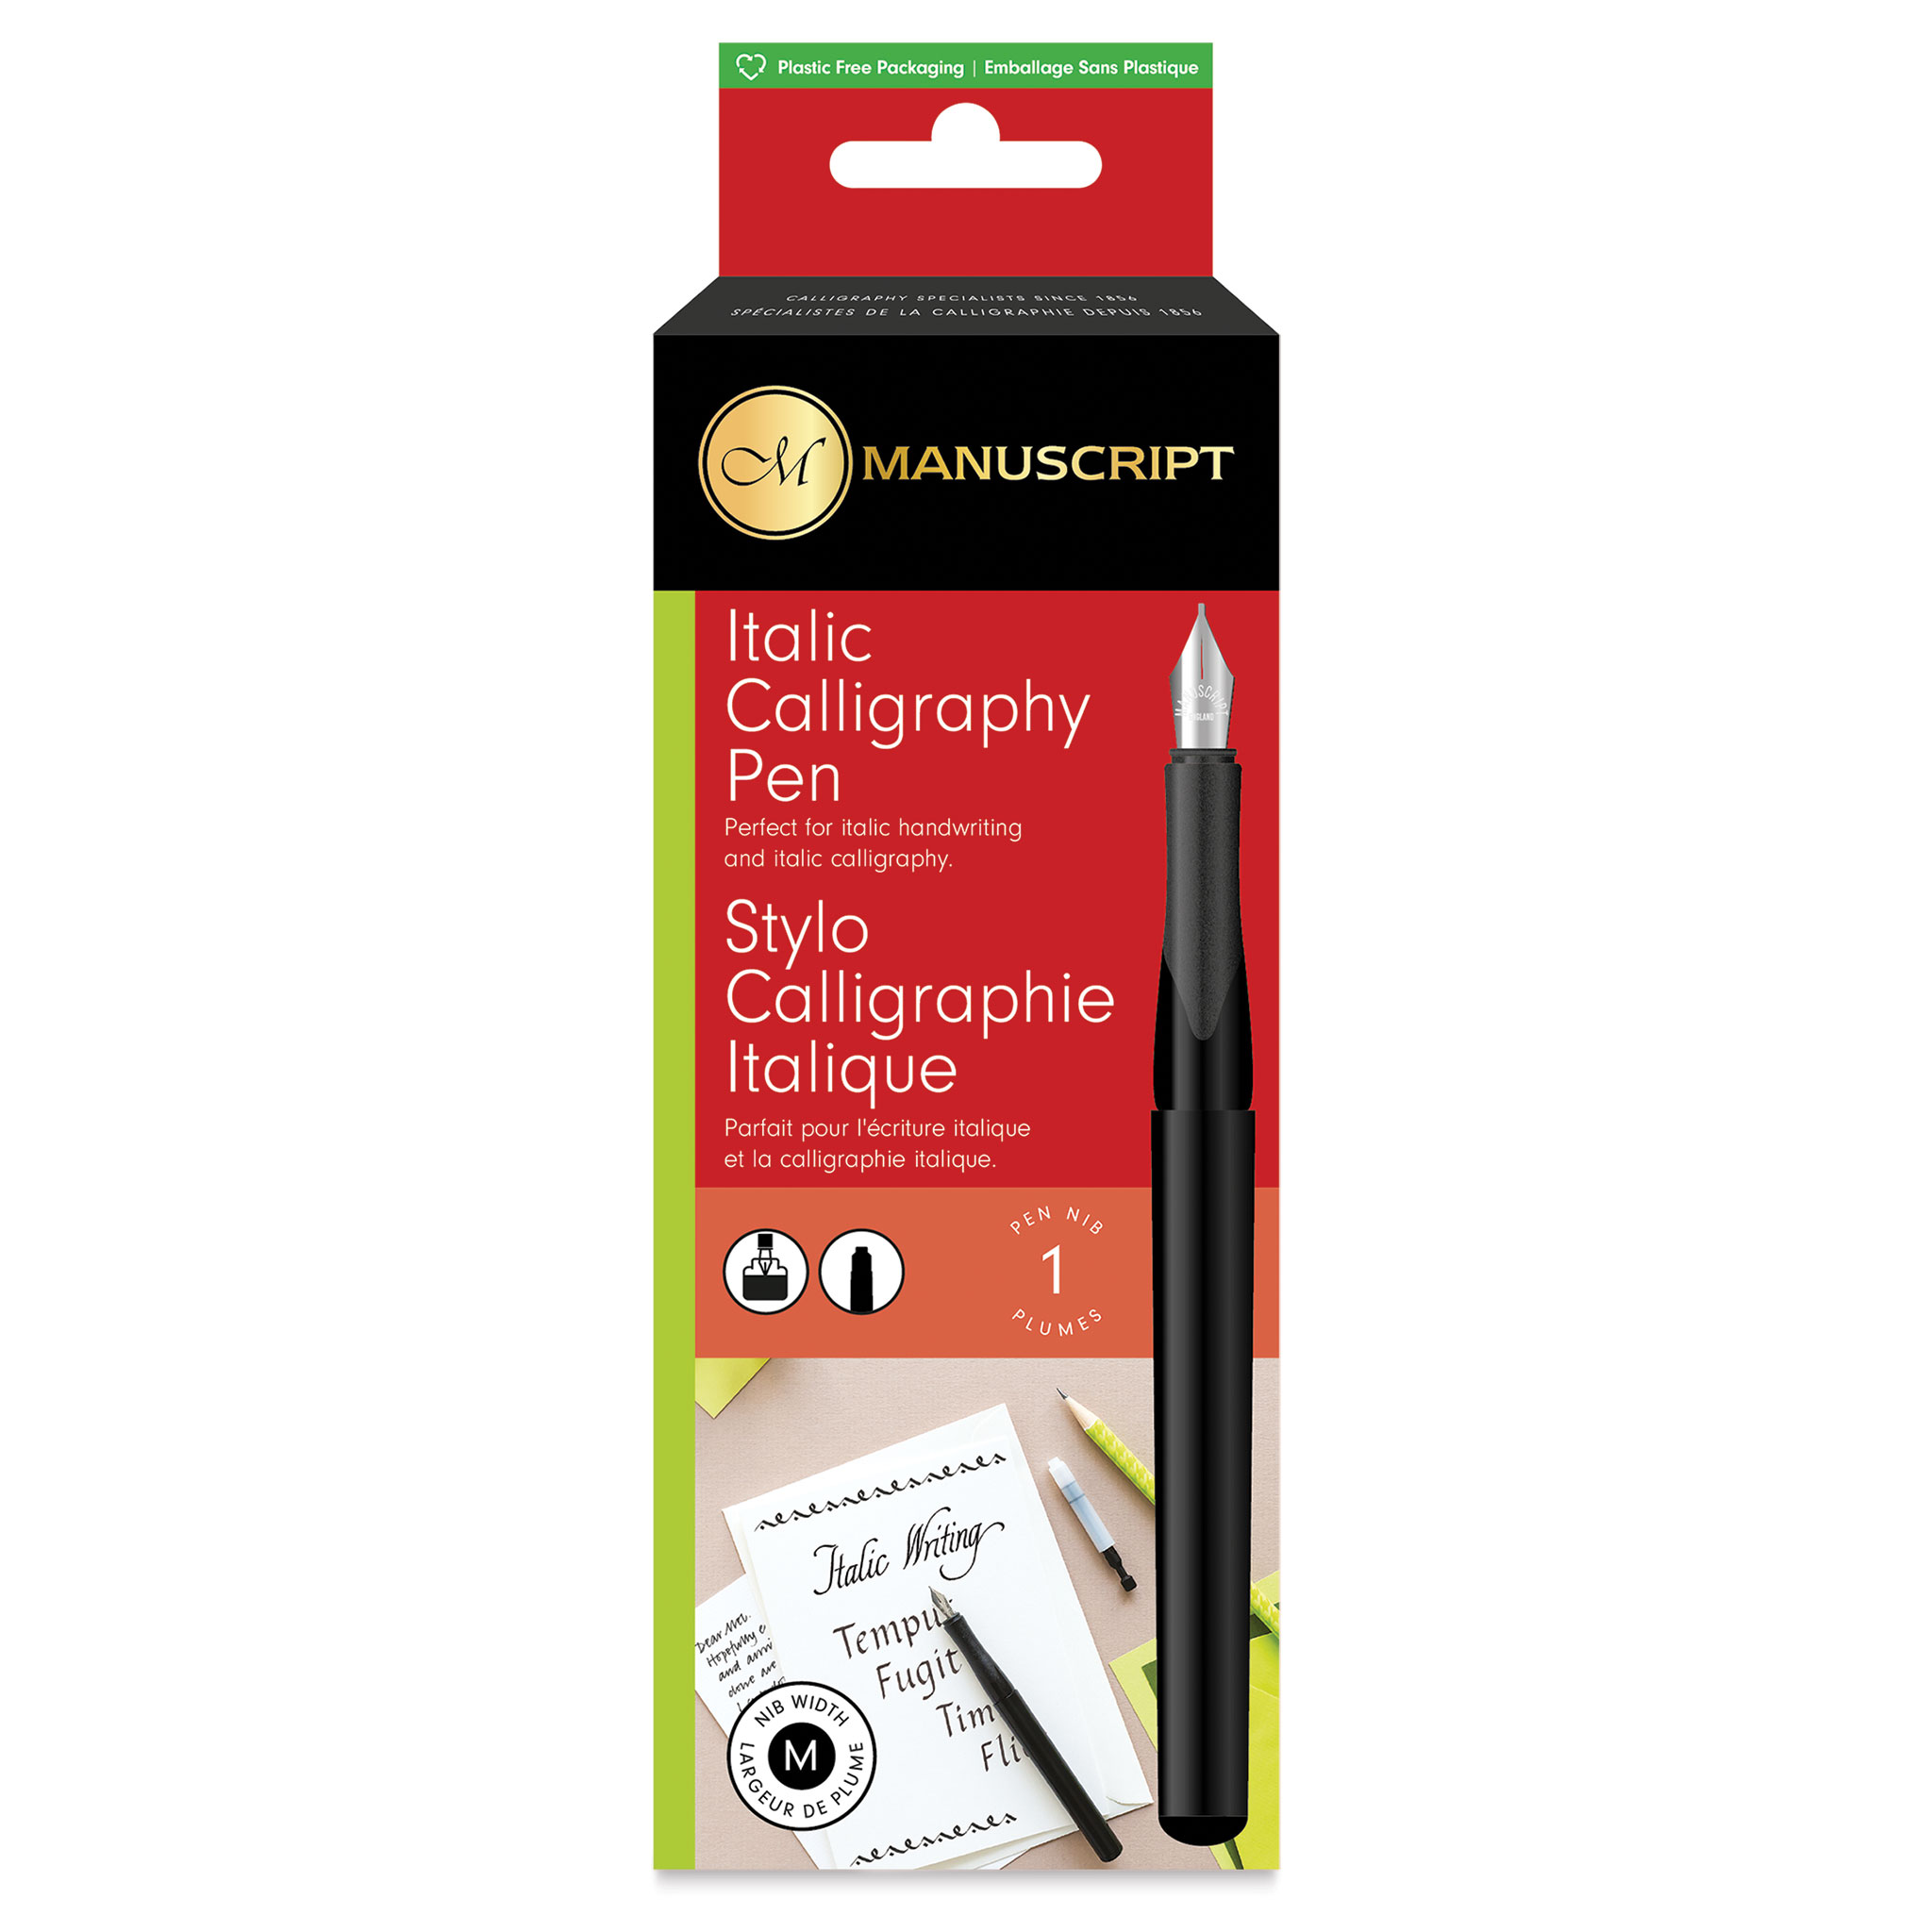 Calligraphy Kits and Gift Sets - Manuscript Pen Company - Shop by Brand